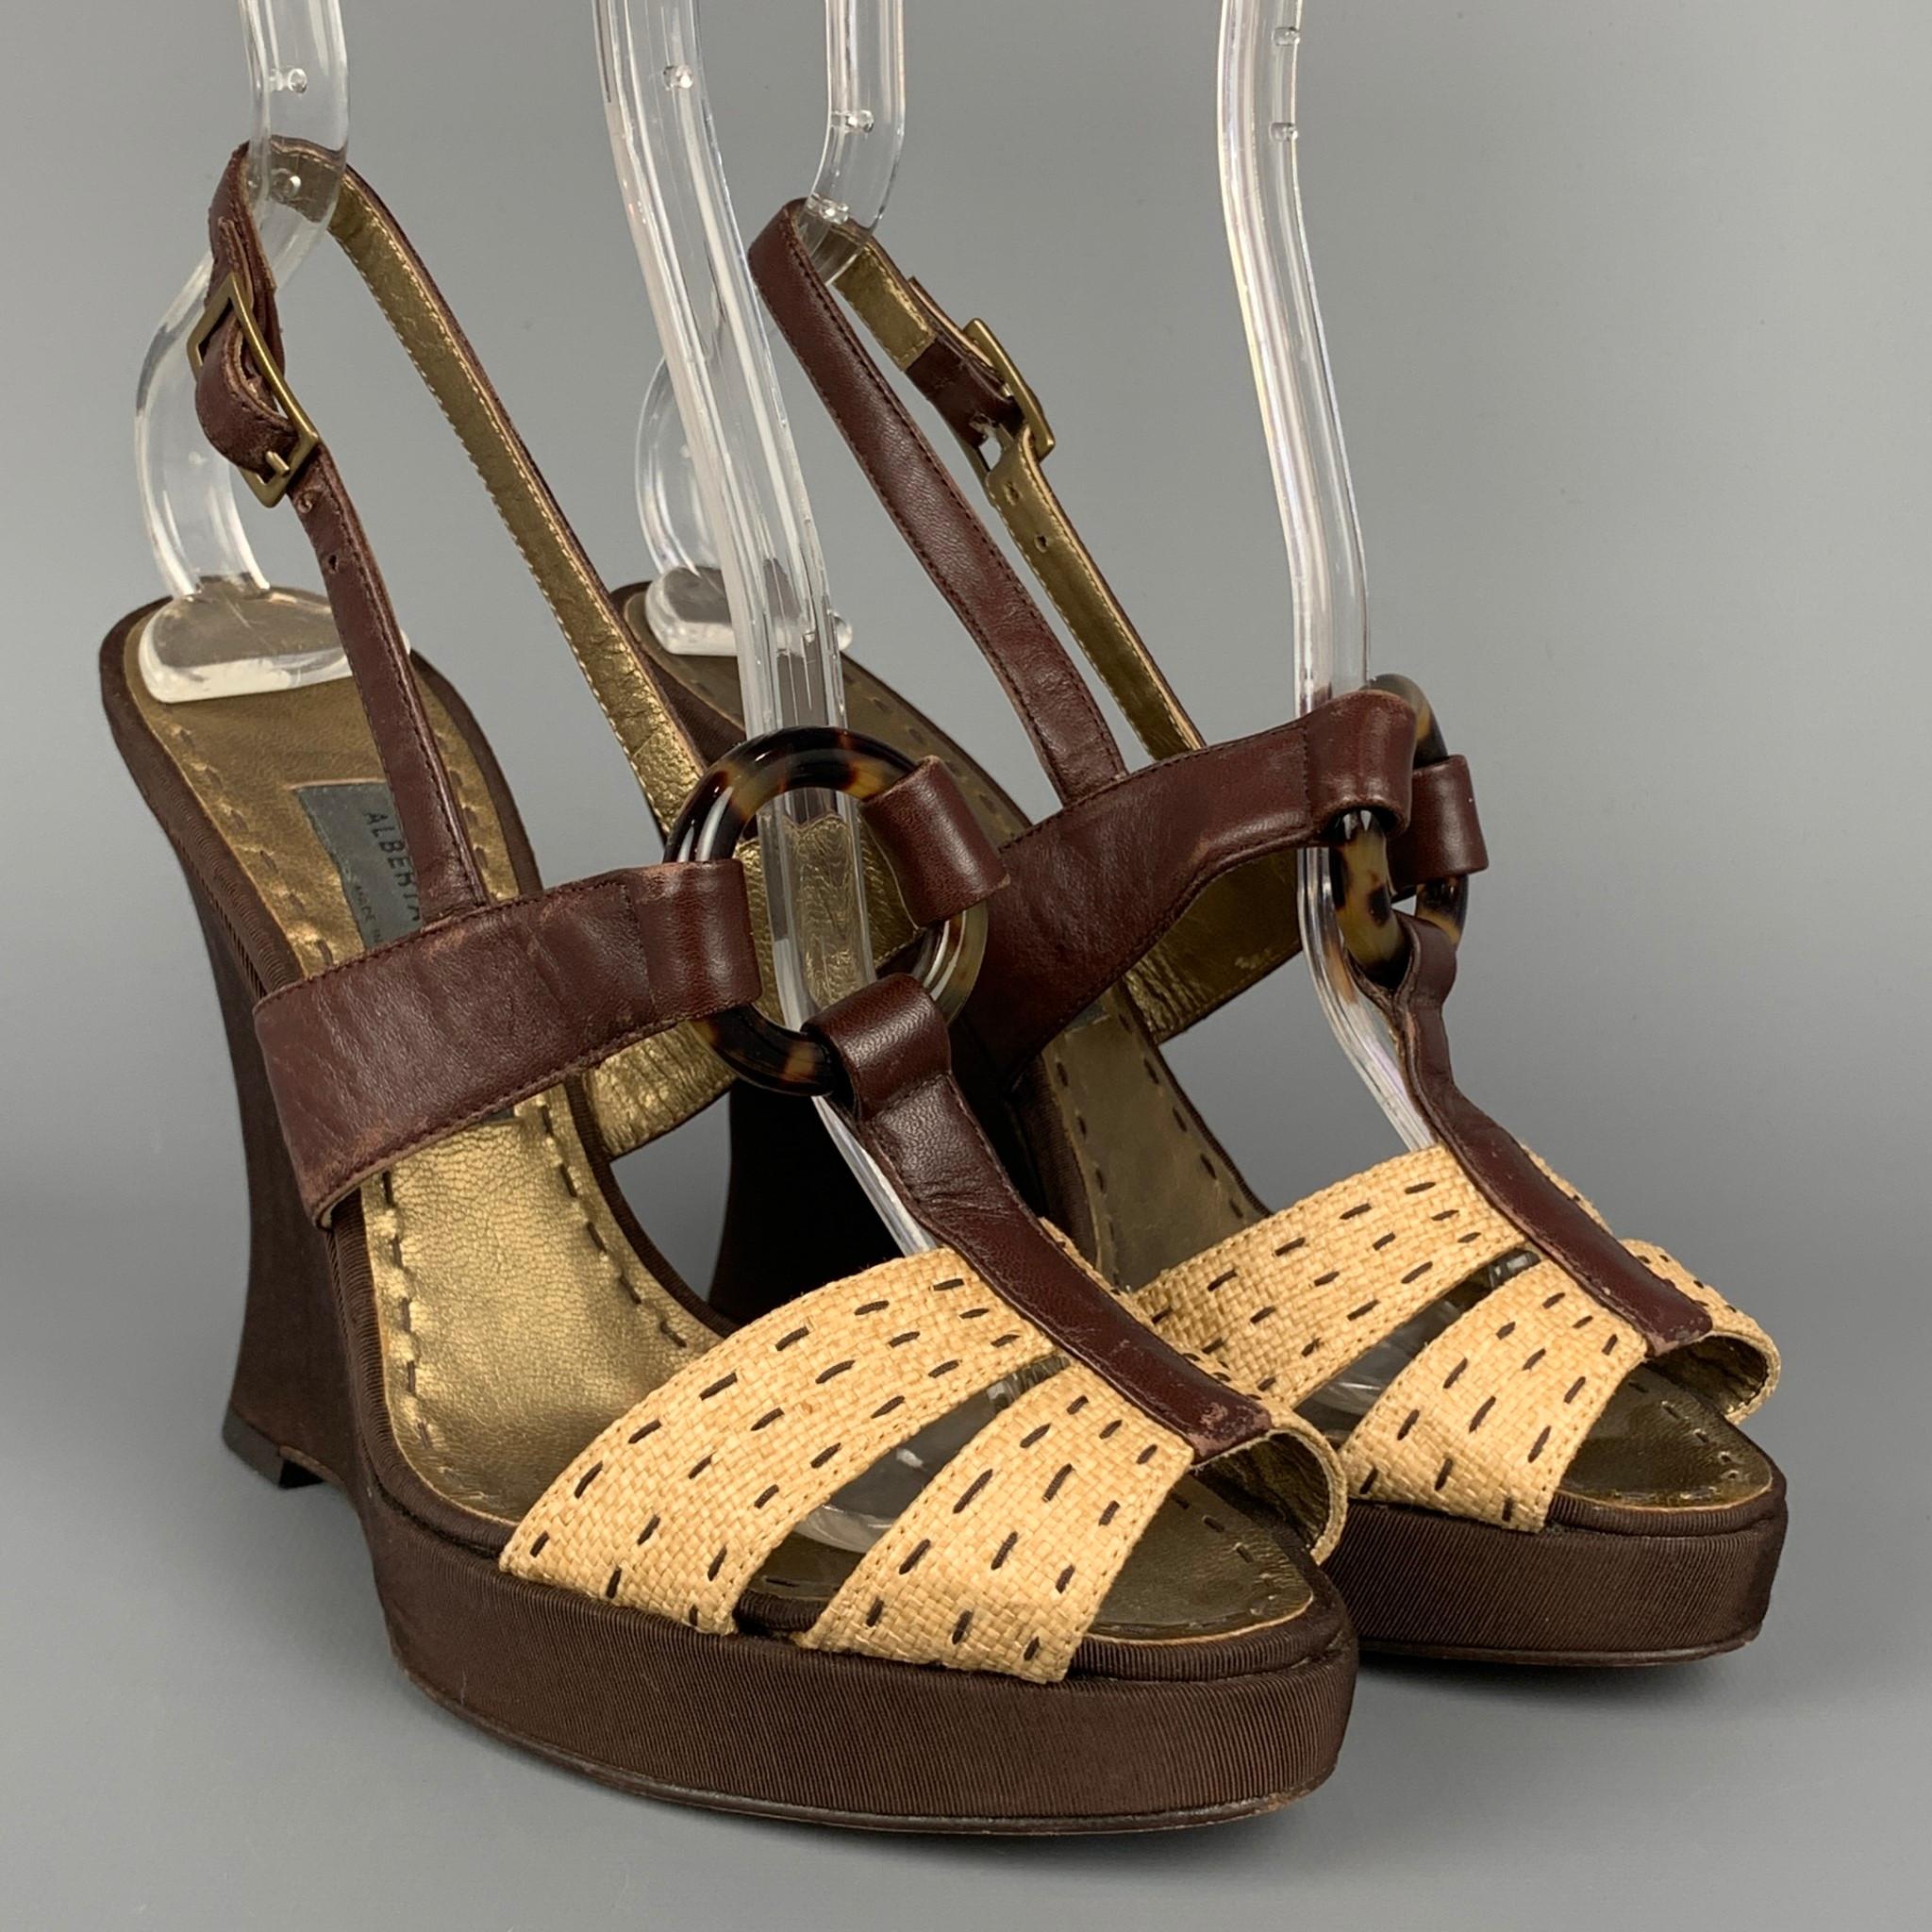 ALBERTA FERRETTI sandals comes in a brown & beige leather with a silk trim featuring a tortoiseshell ring detail, ankle strap, and a wedge heel. Made in Italy.

Very Good Pre-Owned Condition. Minor marks at strap.
Marked: 36.5

Measurements:

Heel: